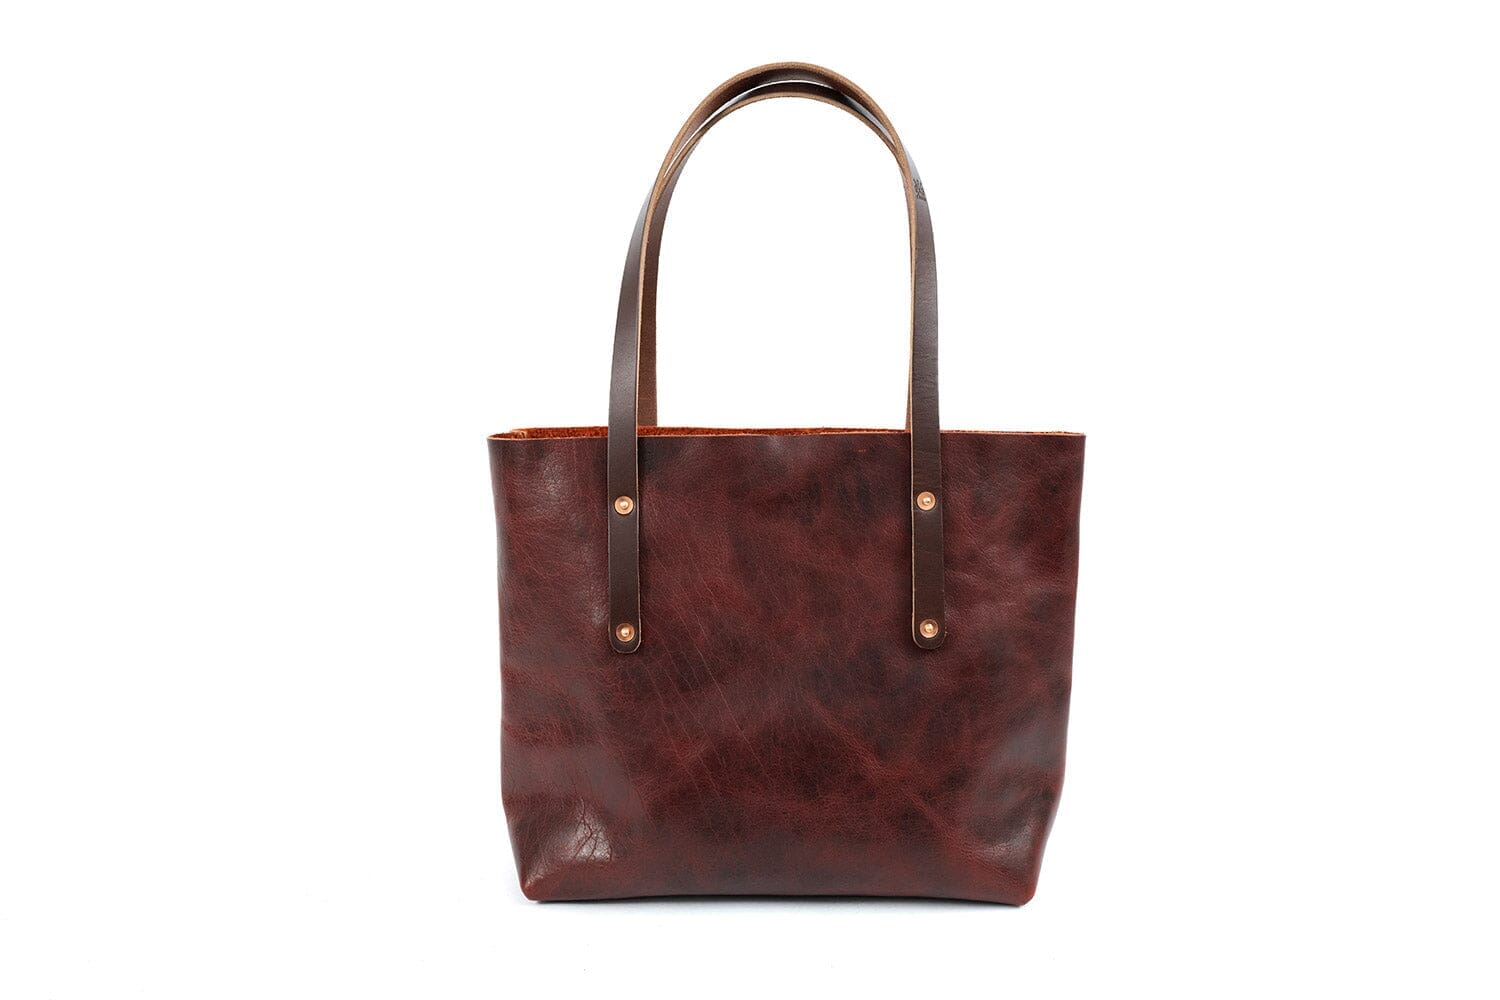 AVERY LEATHER TOTE BAG - SMALL - REDWOOD BISON (RTS)